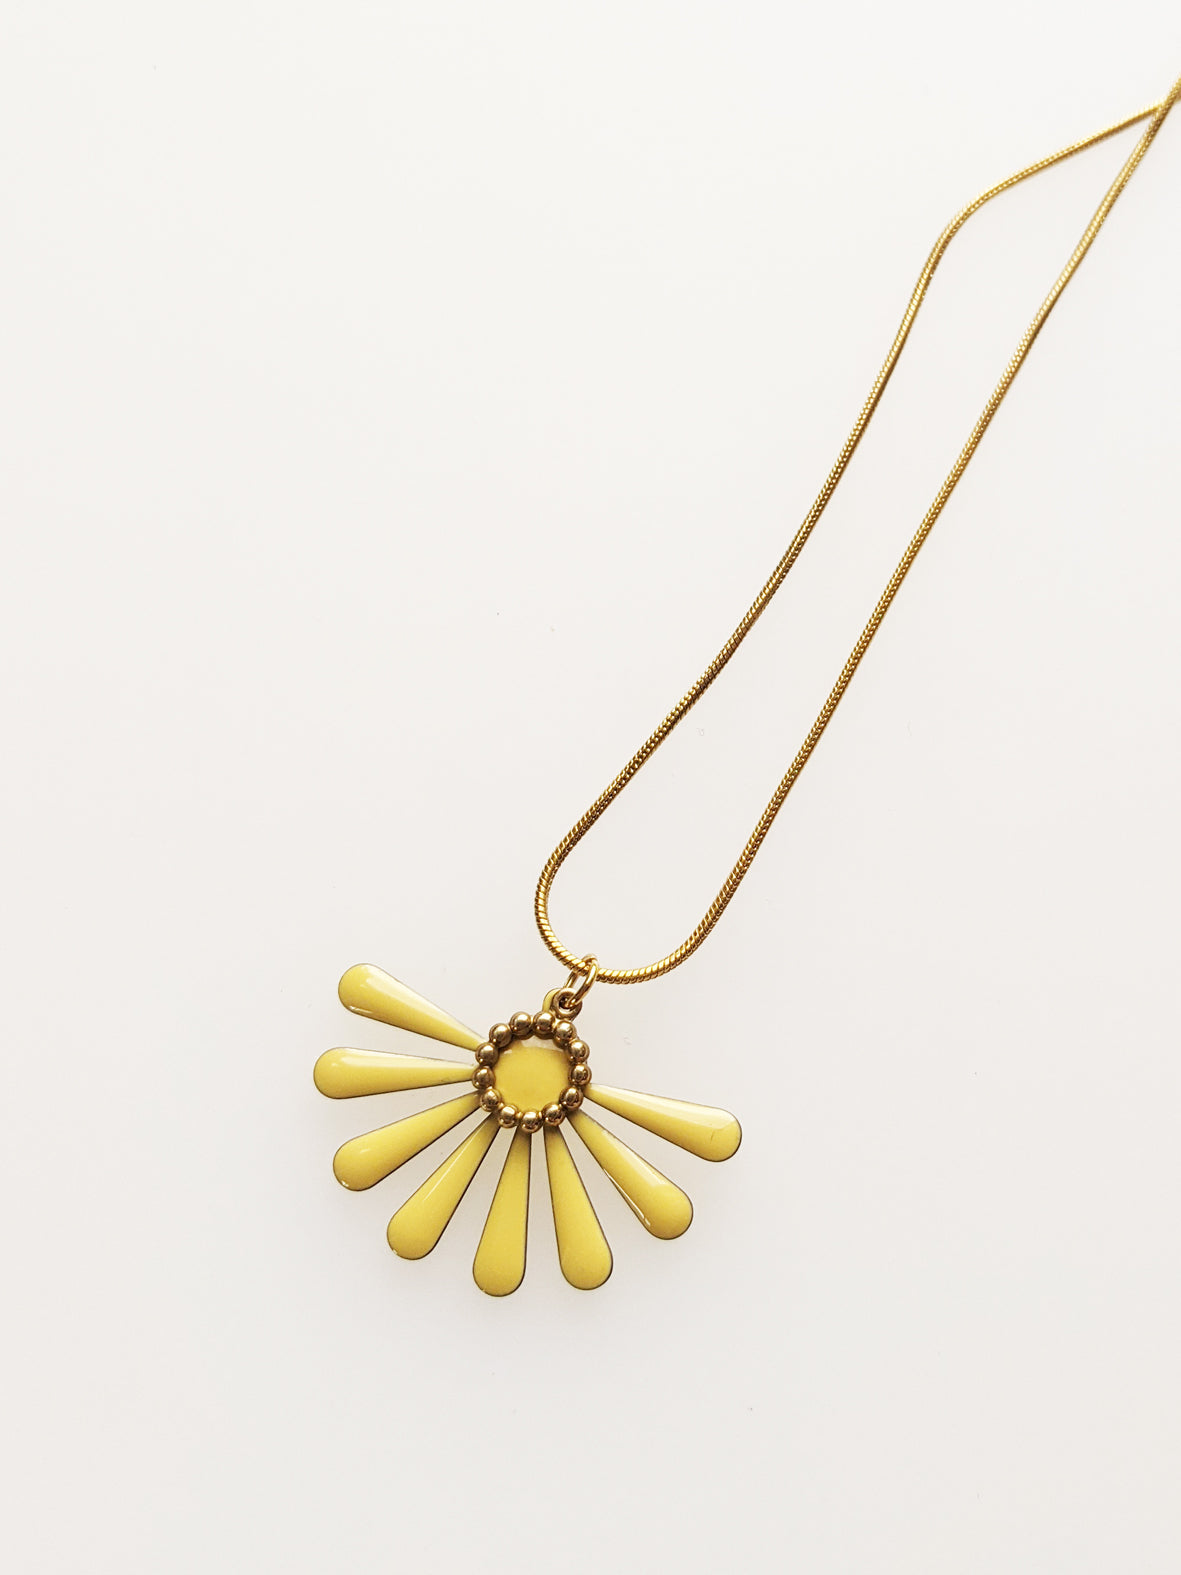 A necklace sits against a white background. It features a gold chain and a yellow coloured floral enamel shape. A tiny brass ring encircles the disk of the floral enamel piece.